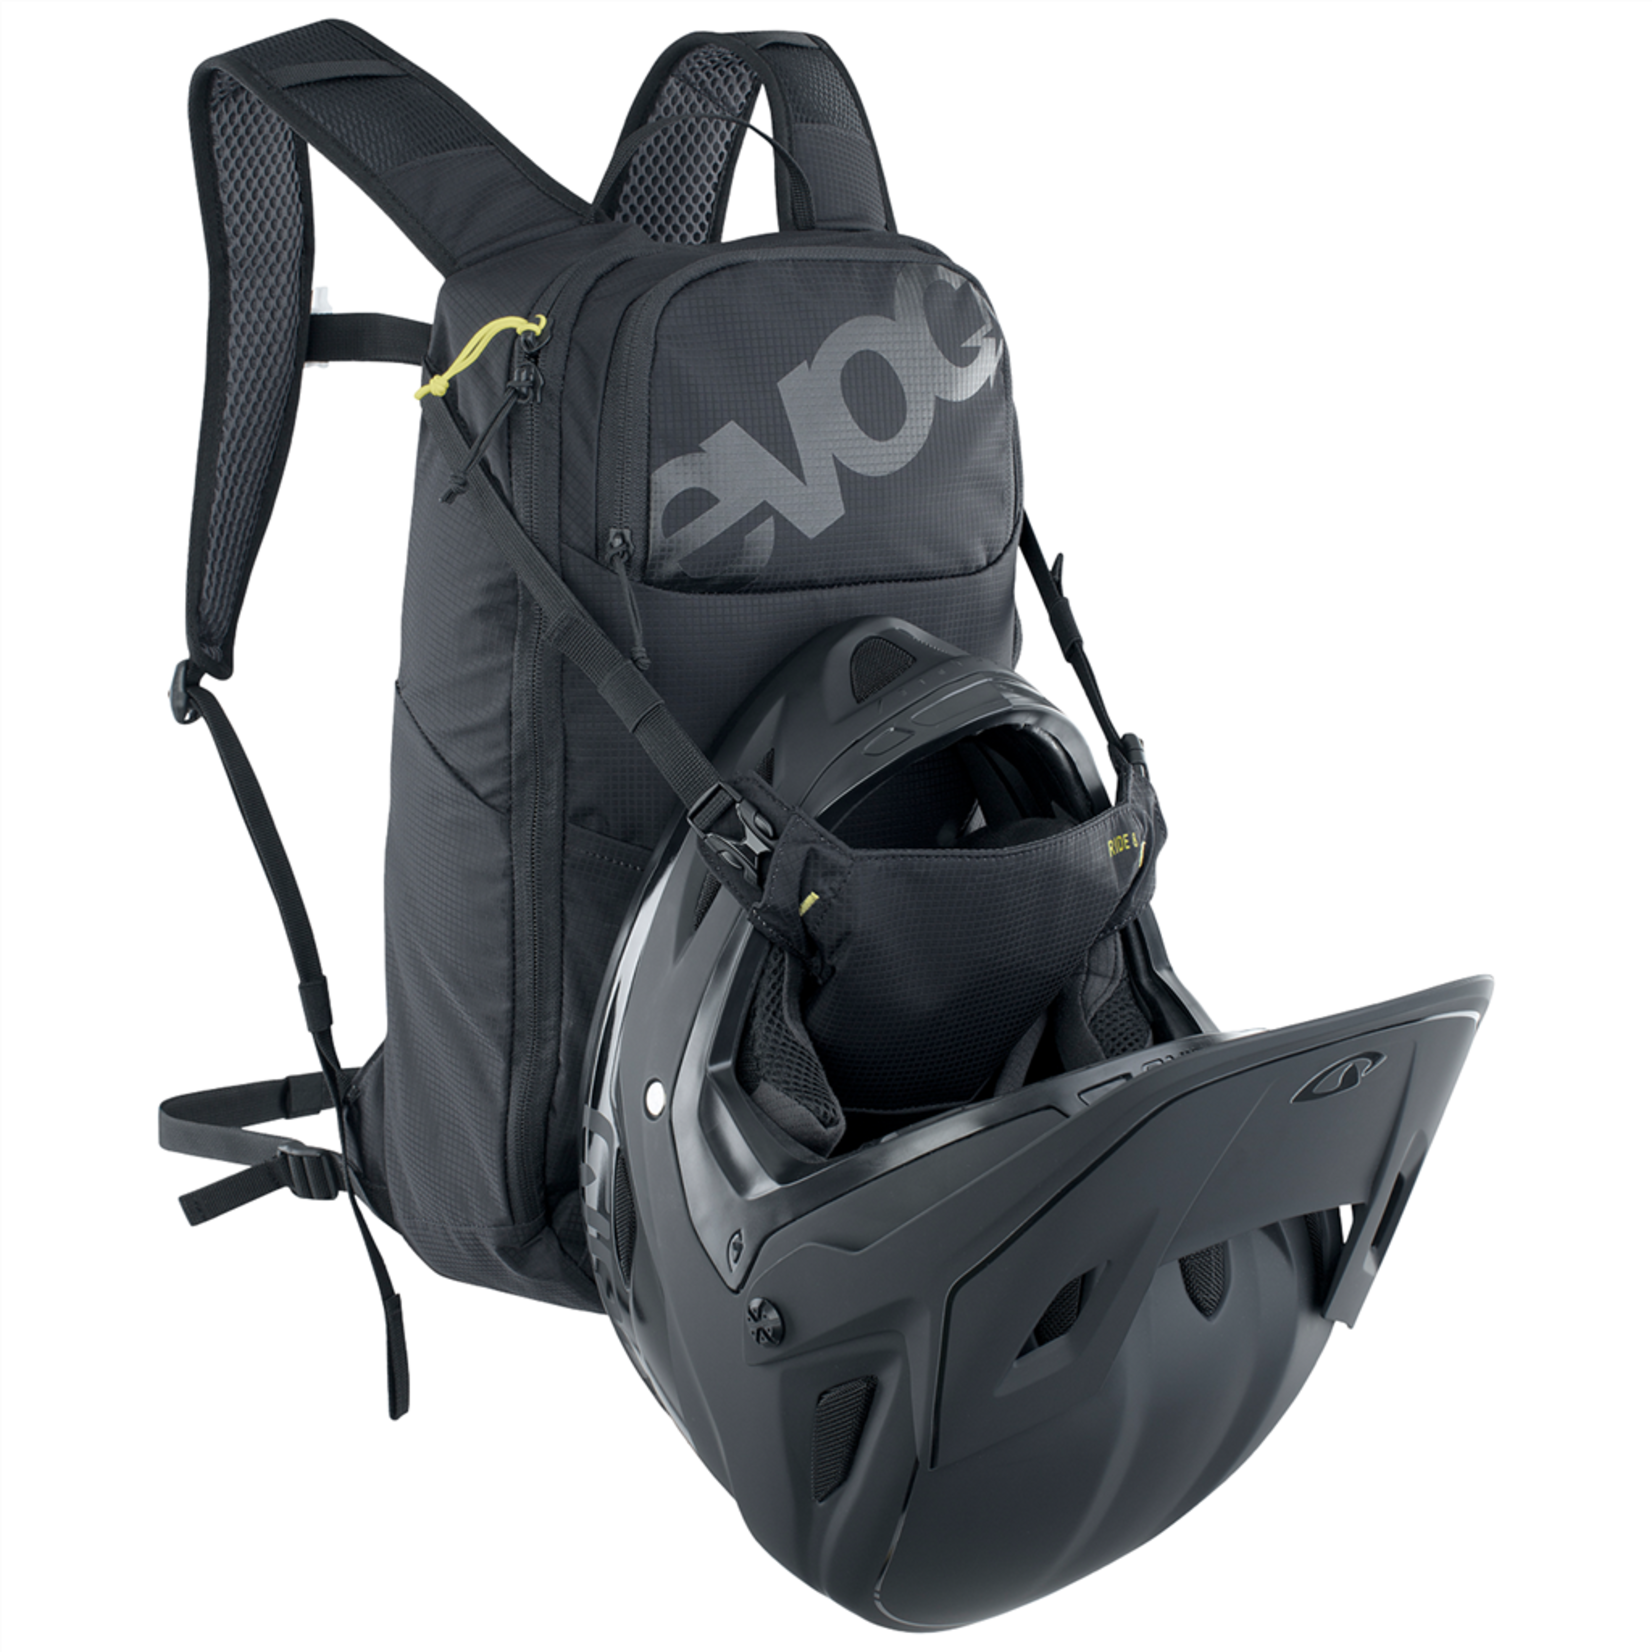 EVOC Ride 8L Backpack - One size